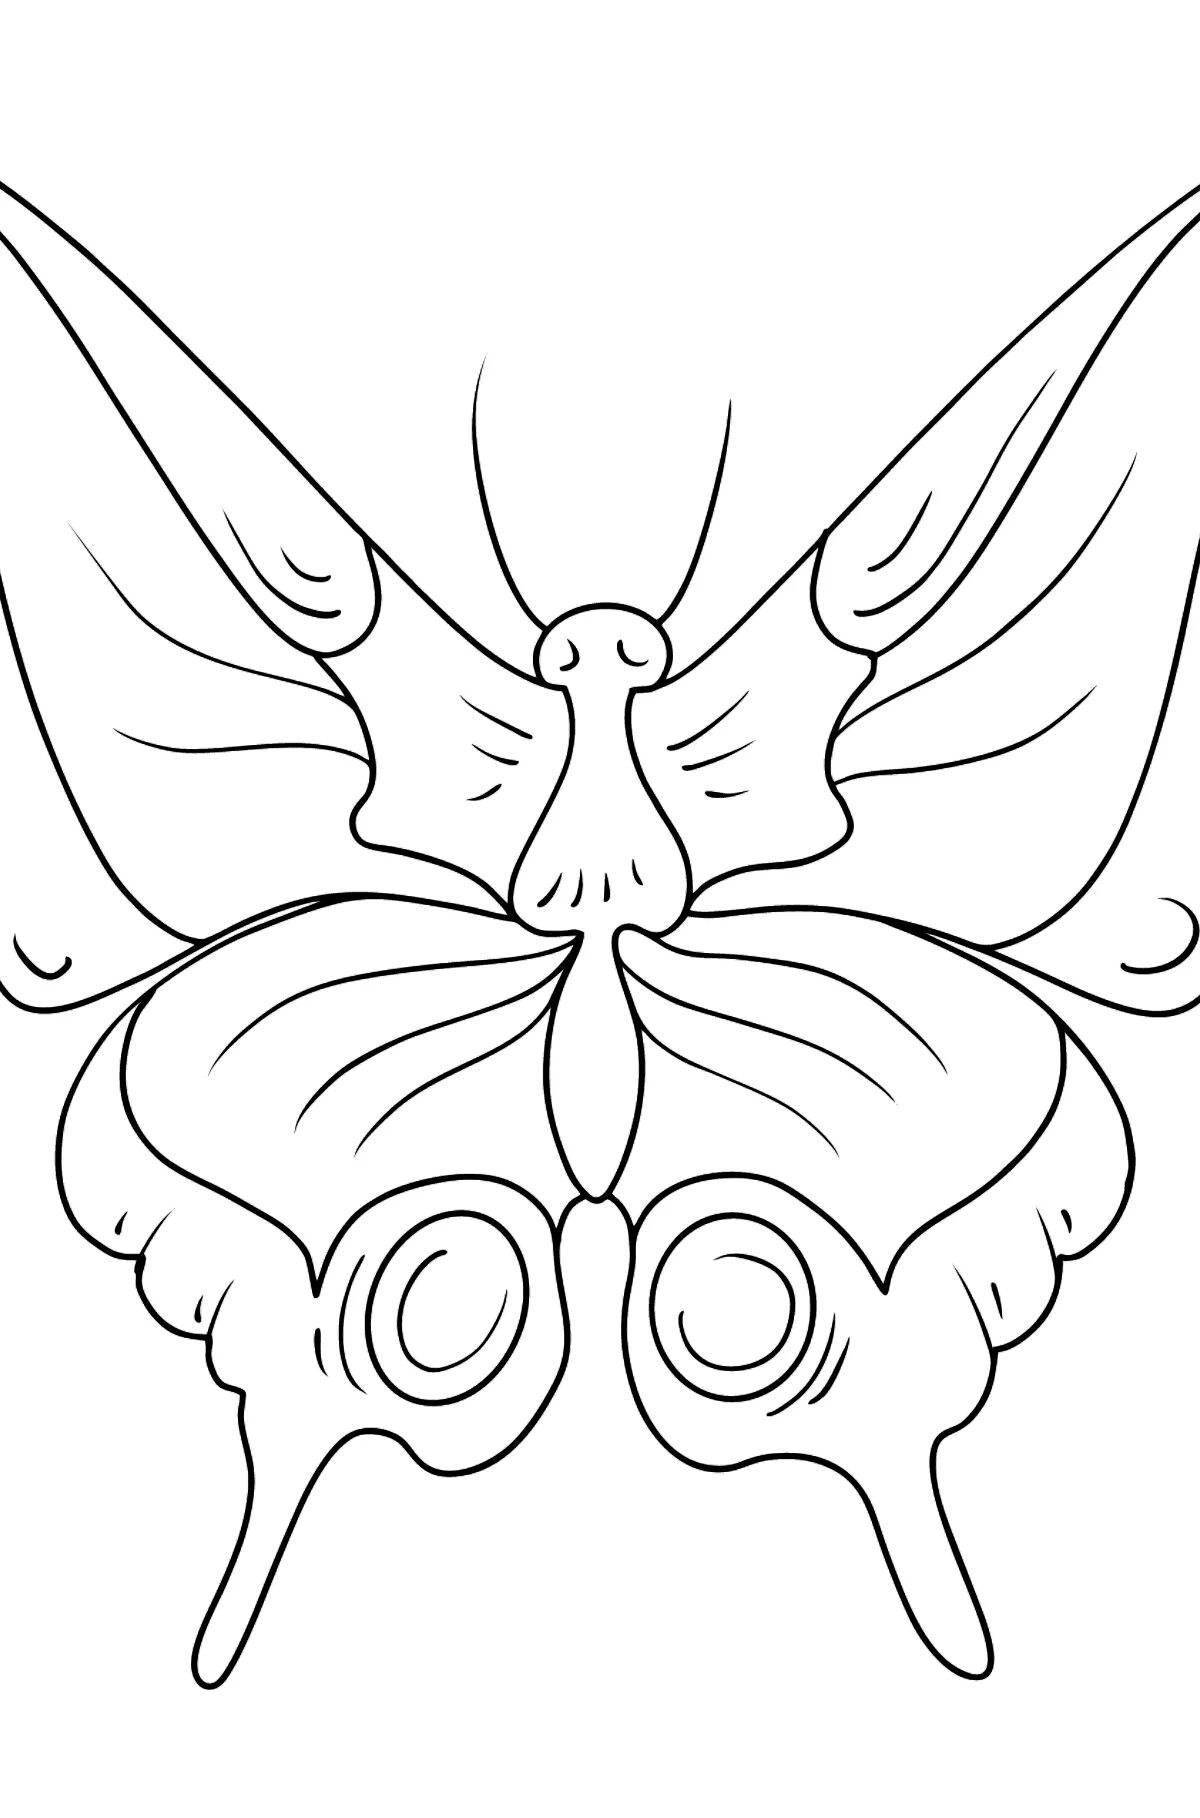 Majestic swallowtail butterfly coloring page